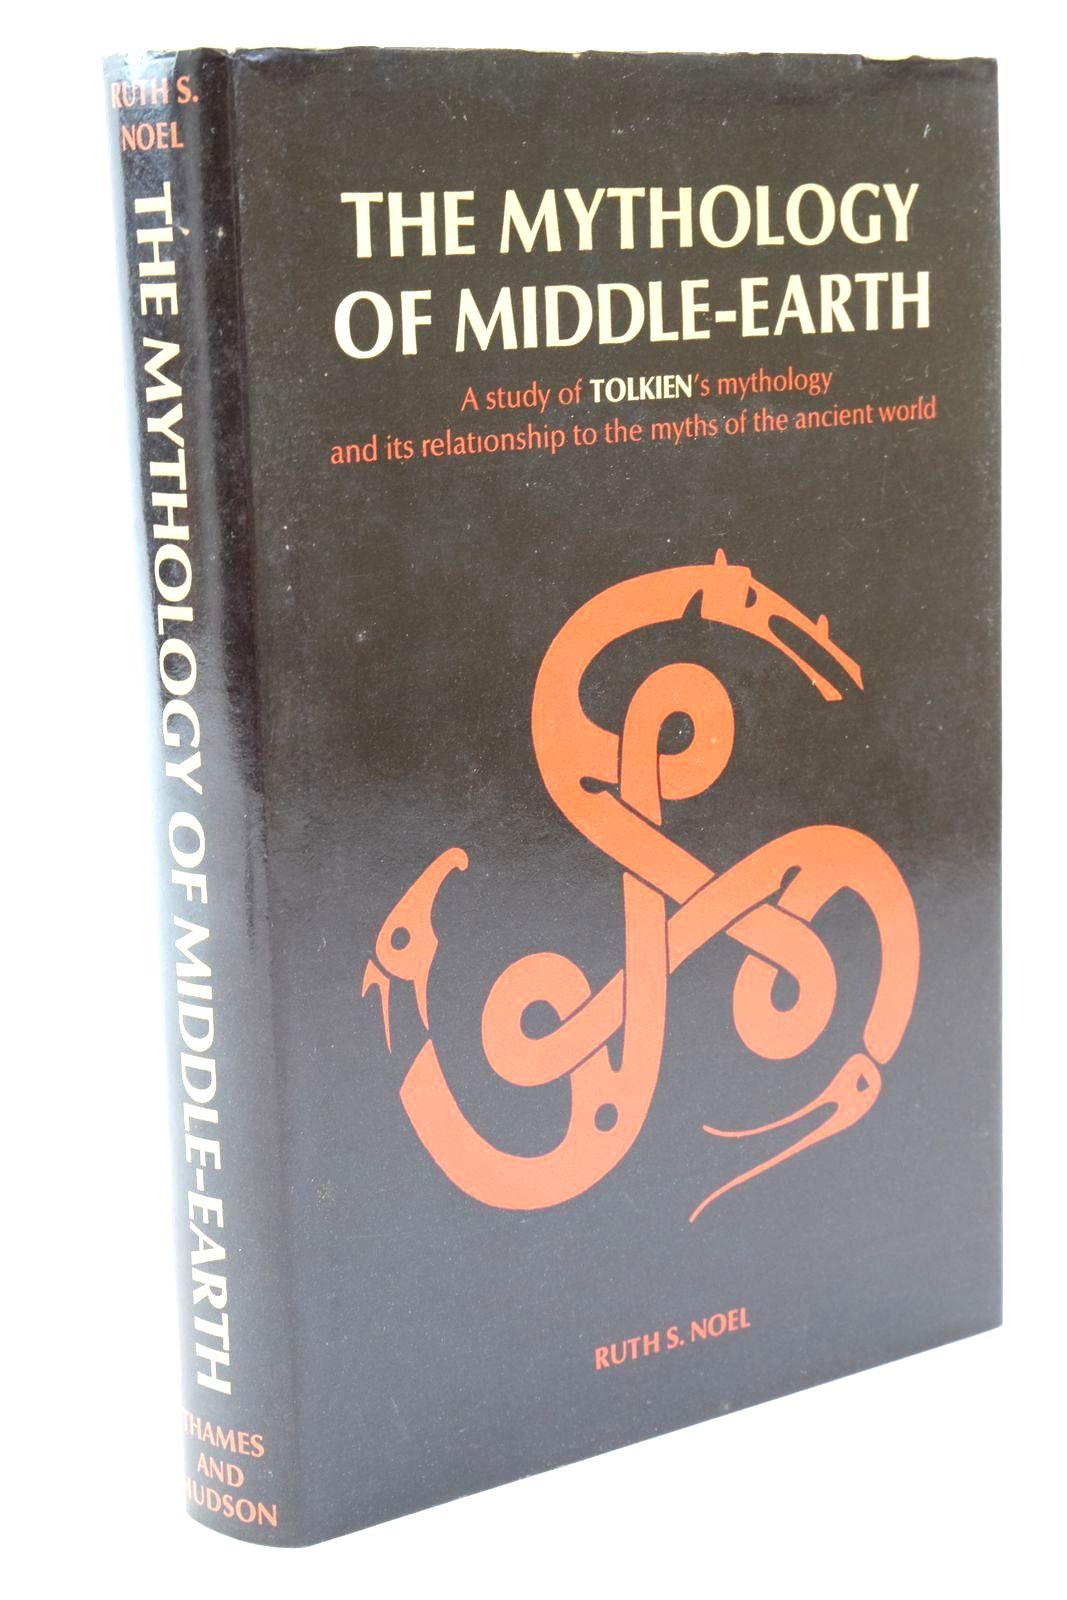 Photo of THE MYTHOLOGY OF MIDDLE-EARTH written by Noel, Ruth S. published by Thames and Hudson (STOCK CODE: 1322557)  for sale by Stella & Rose's Books